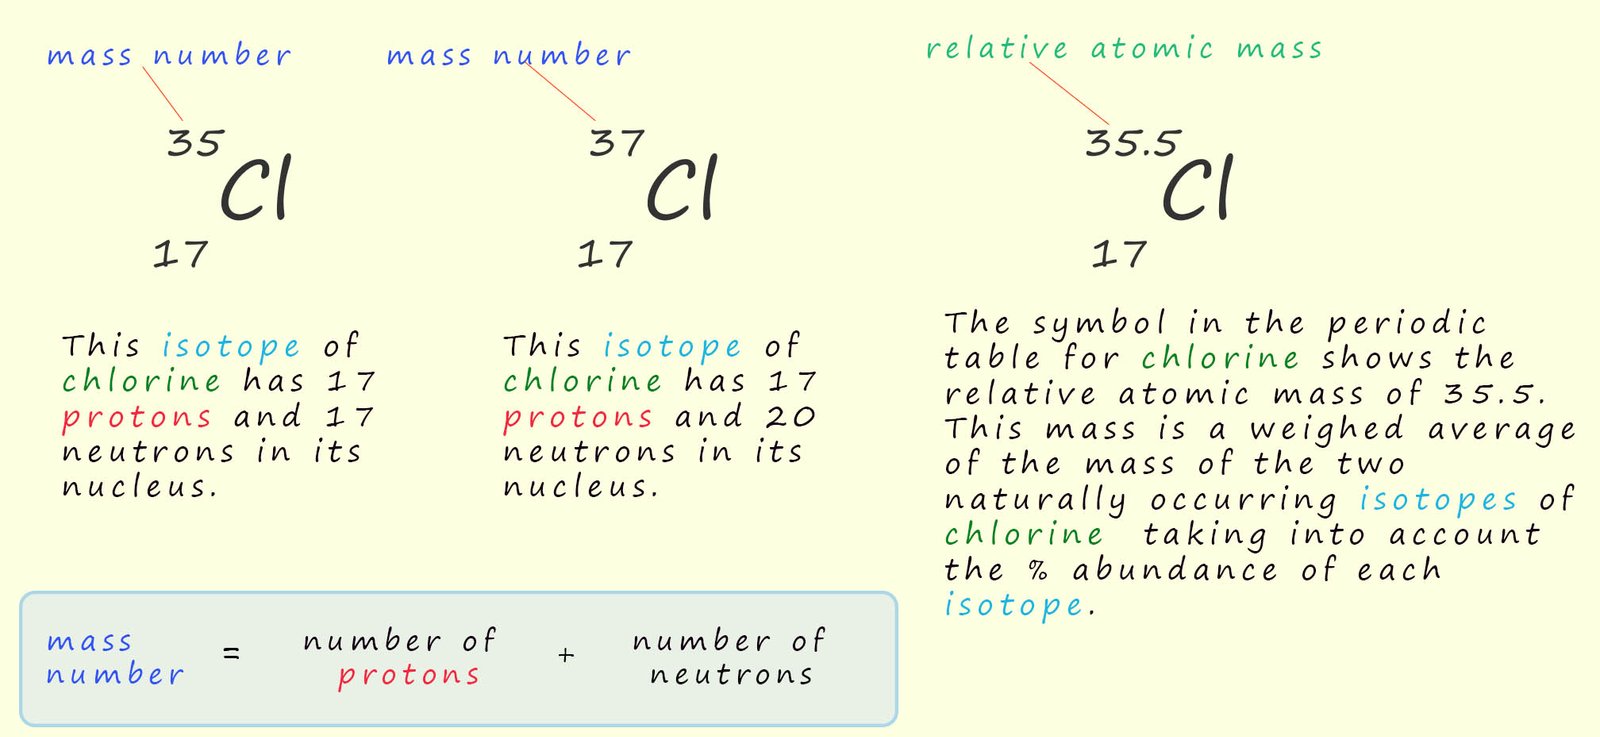 Explanation of the difference between mass number and relative atomic mass